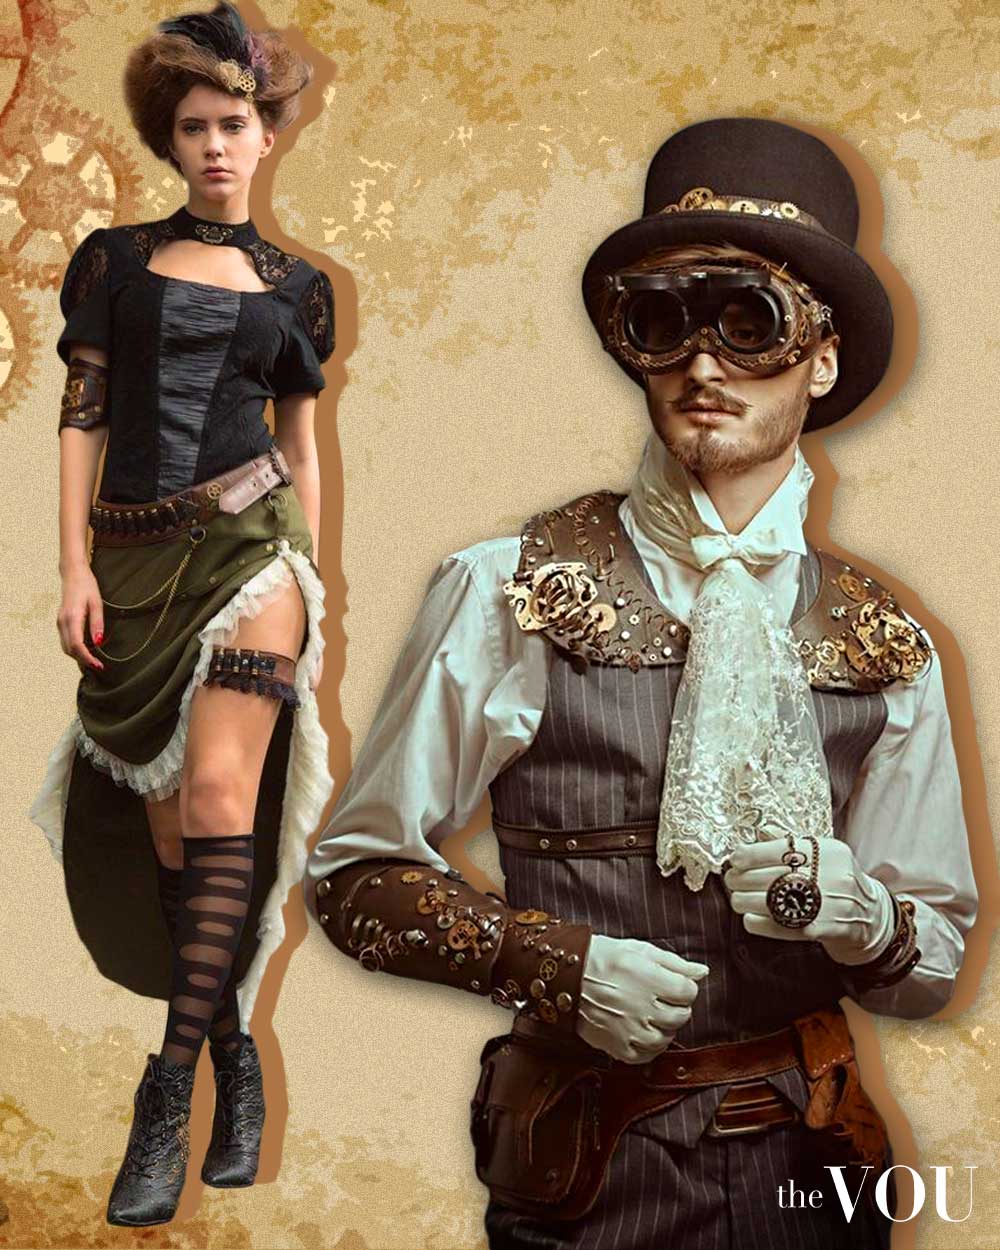 Steampunk Fashion 101 - Key Stylistic Features & How to Dress